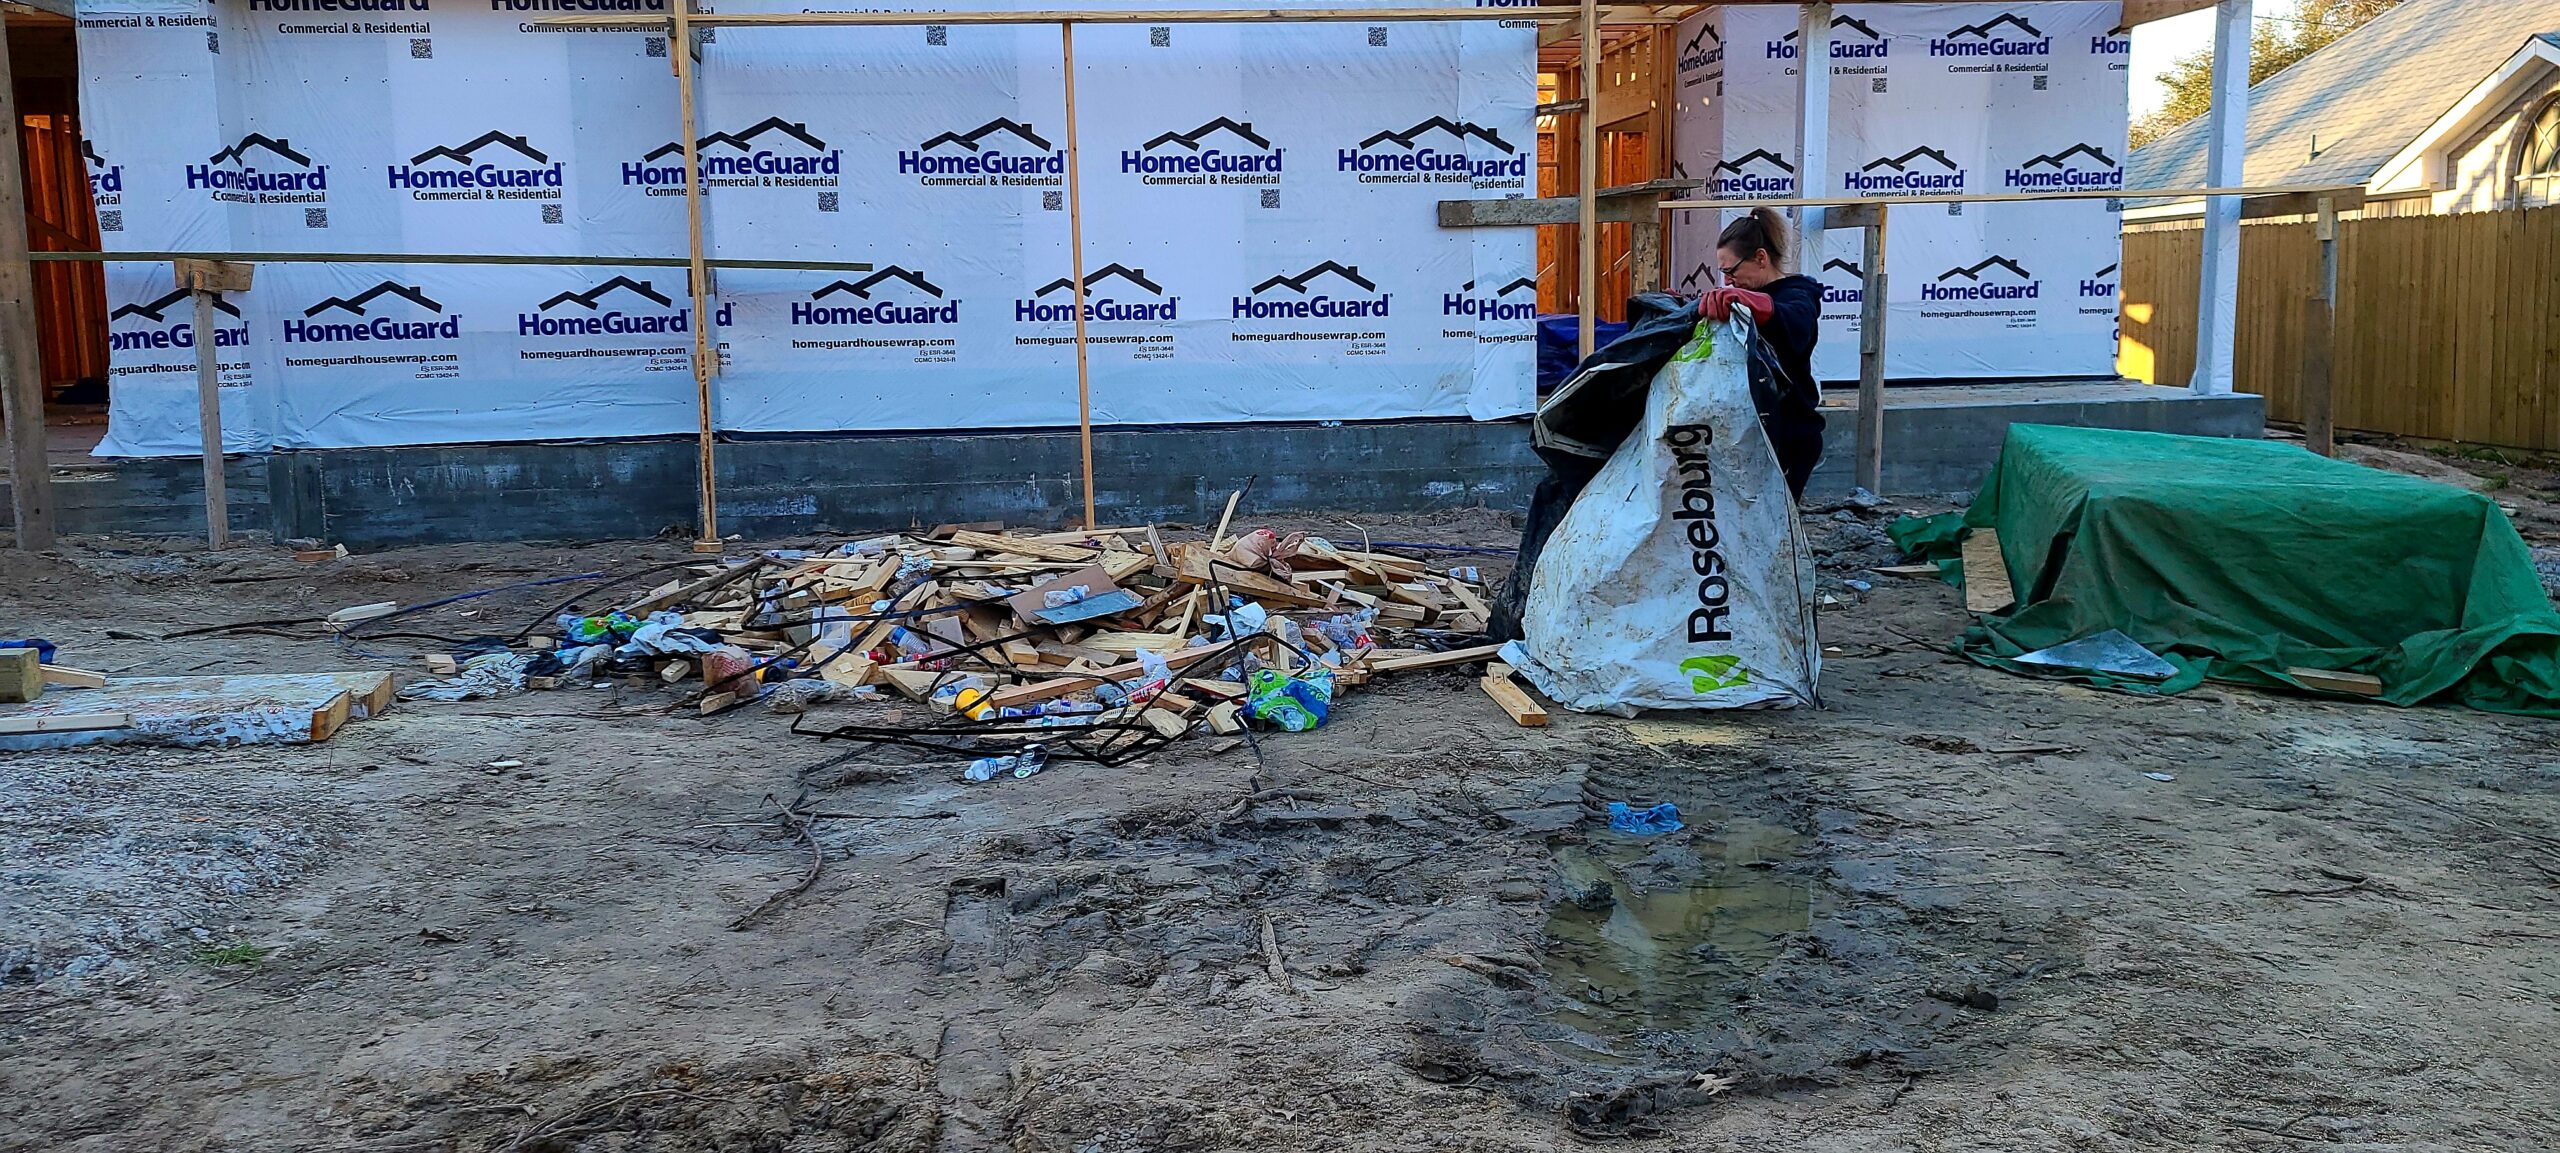 Cleaning up debris at a construction site